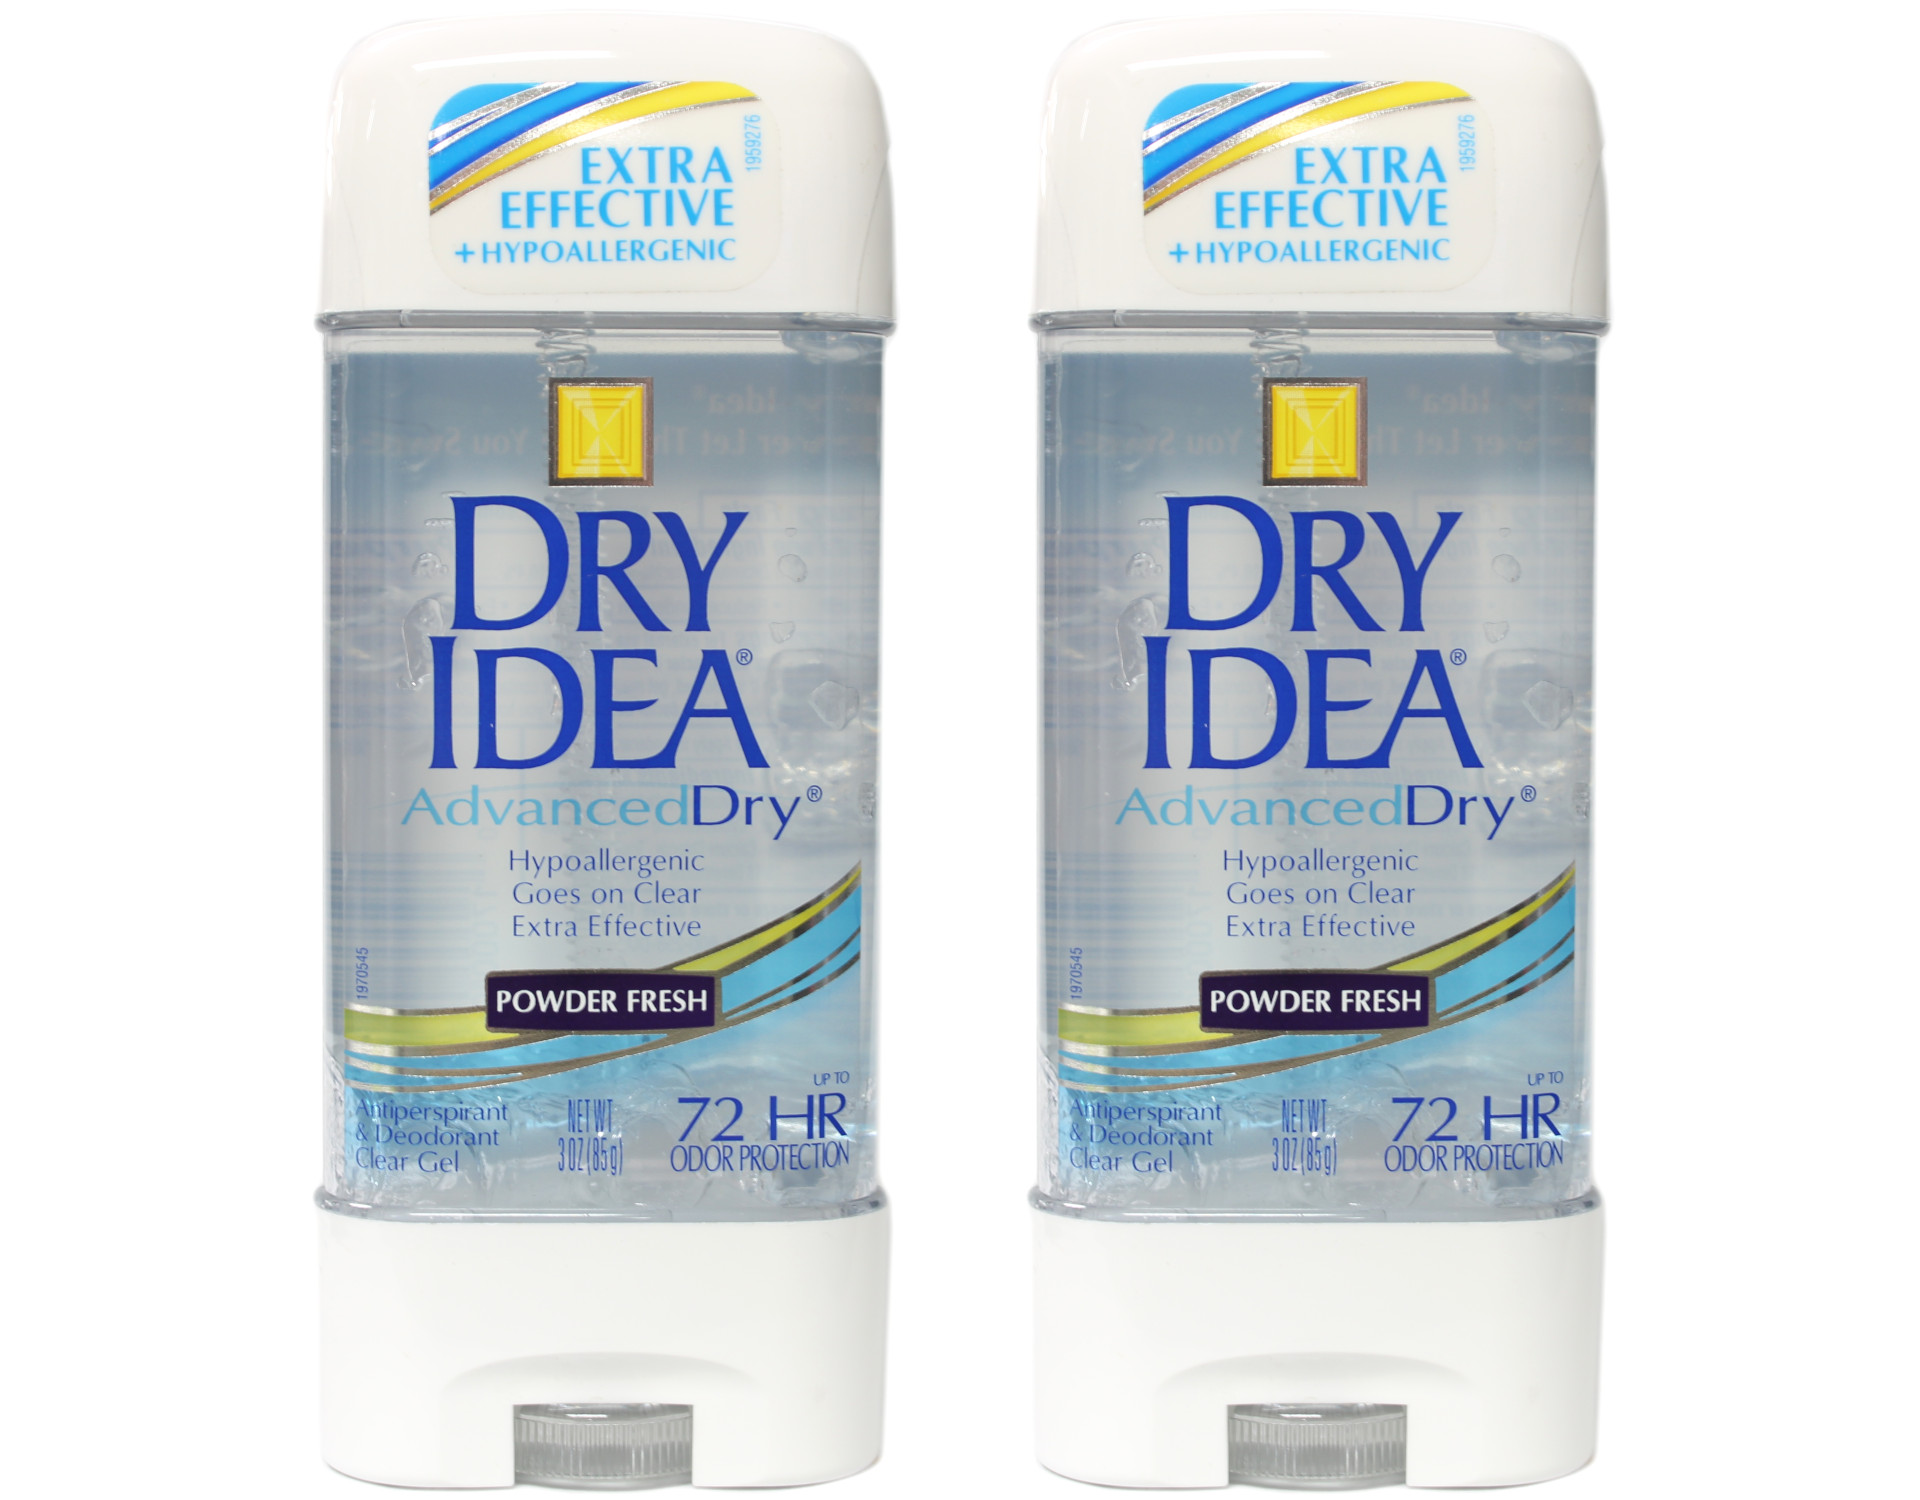 Dry Idea Advanced Dry Unscented Antiperspirant & Deodorant Clear Gel 3 oz (Pack of 2) - image 1 of 2